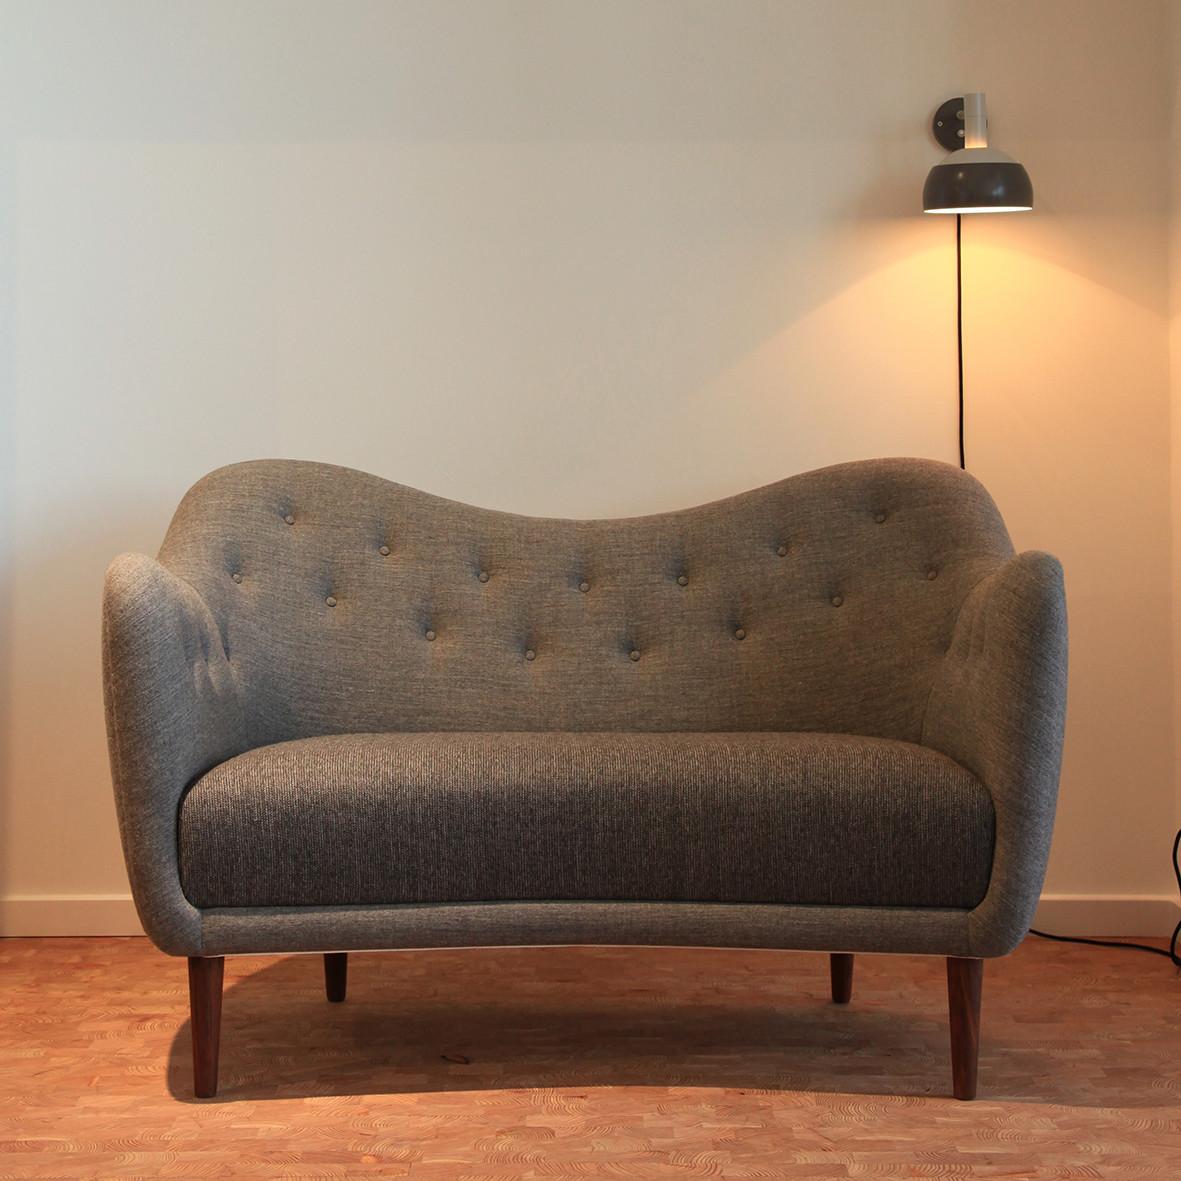 Sofa designed by Finn Juhl in 1946, relaunched in 2008.
Manufactured by House of Finn Juhl in Denmark.

As the name suggests, this sofa was designed in 1946. The sofa was manufactured by the upholsterer Carl Brørup in his workshop in